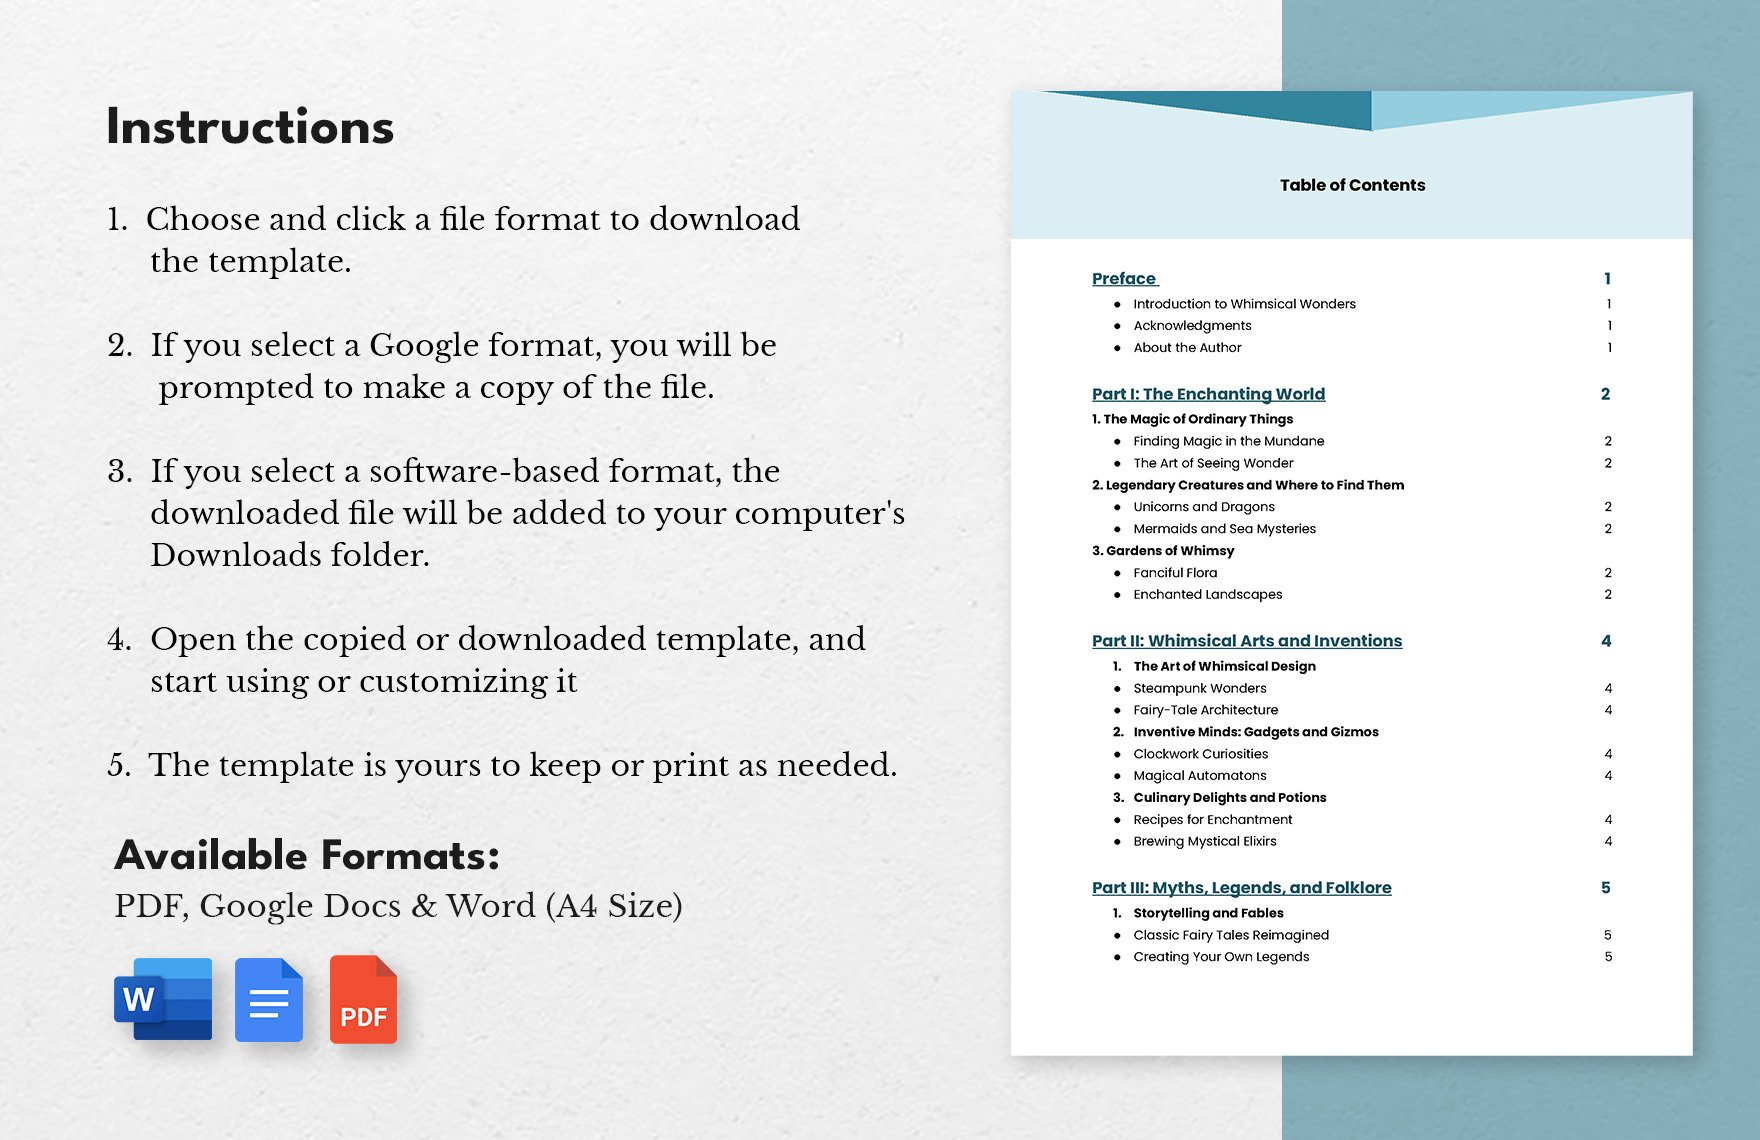 Table of Contents Template